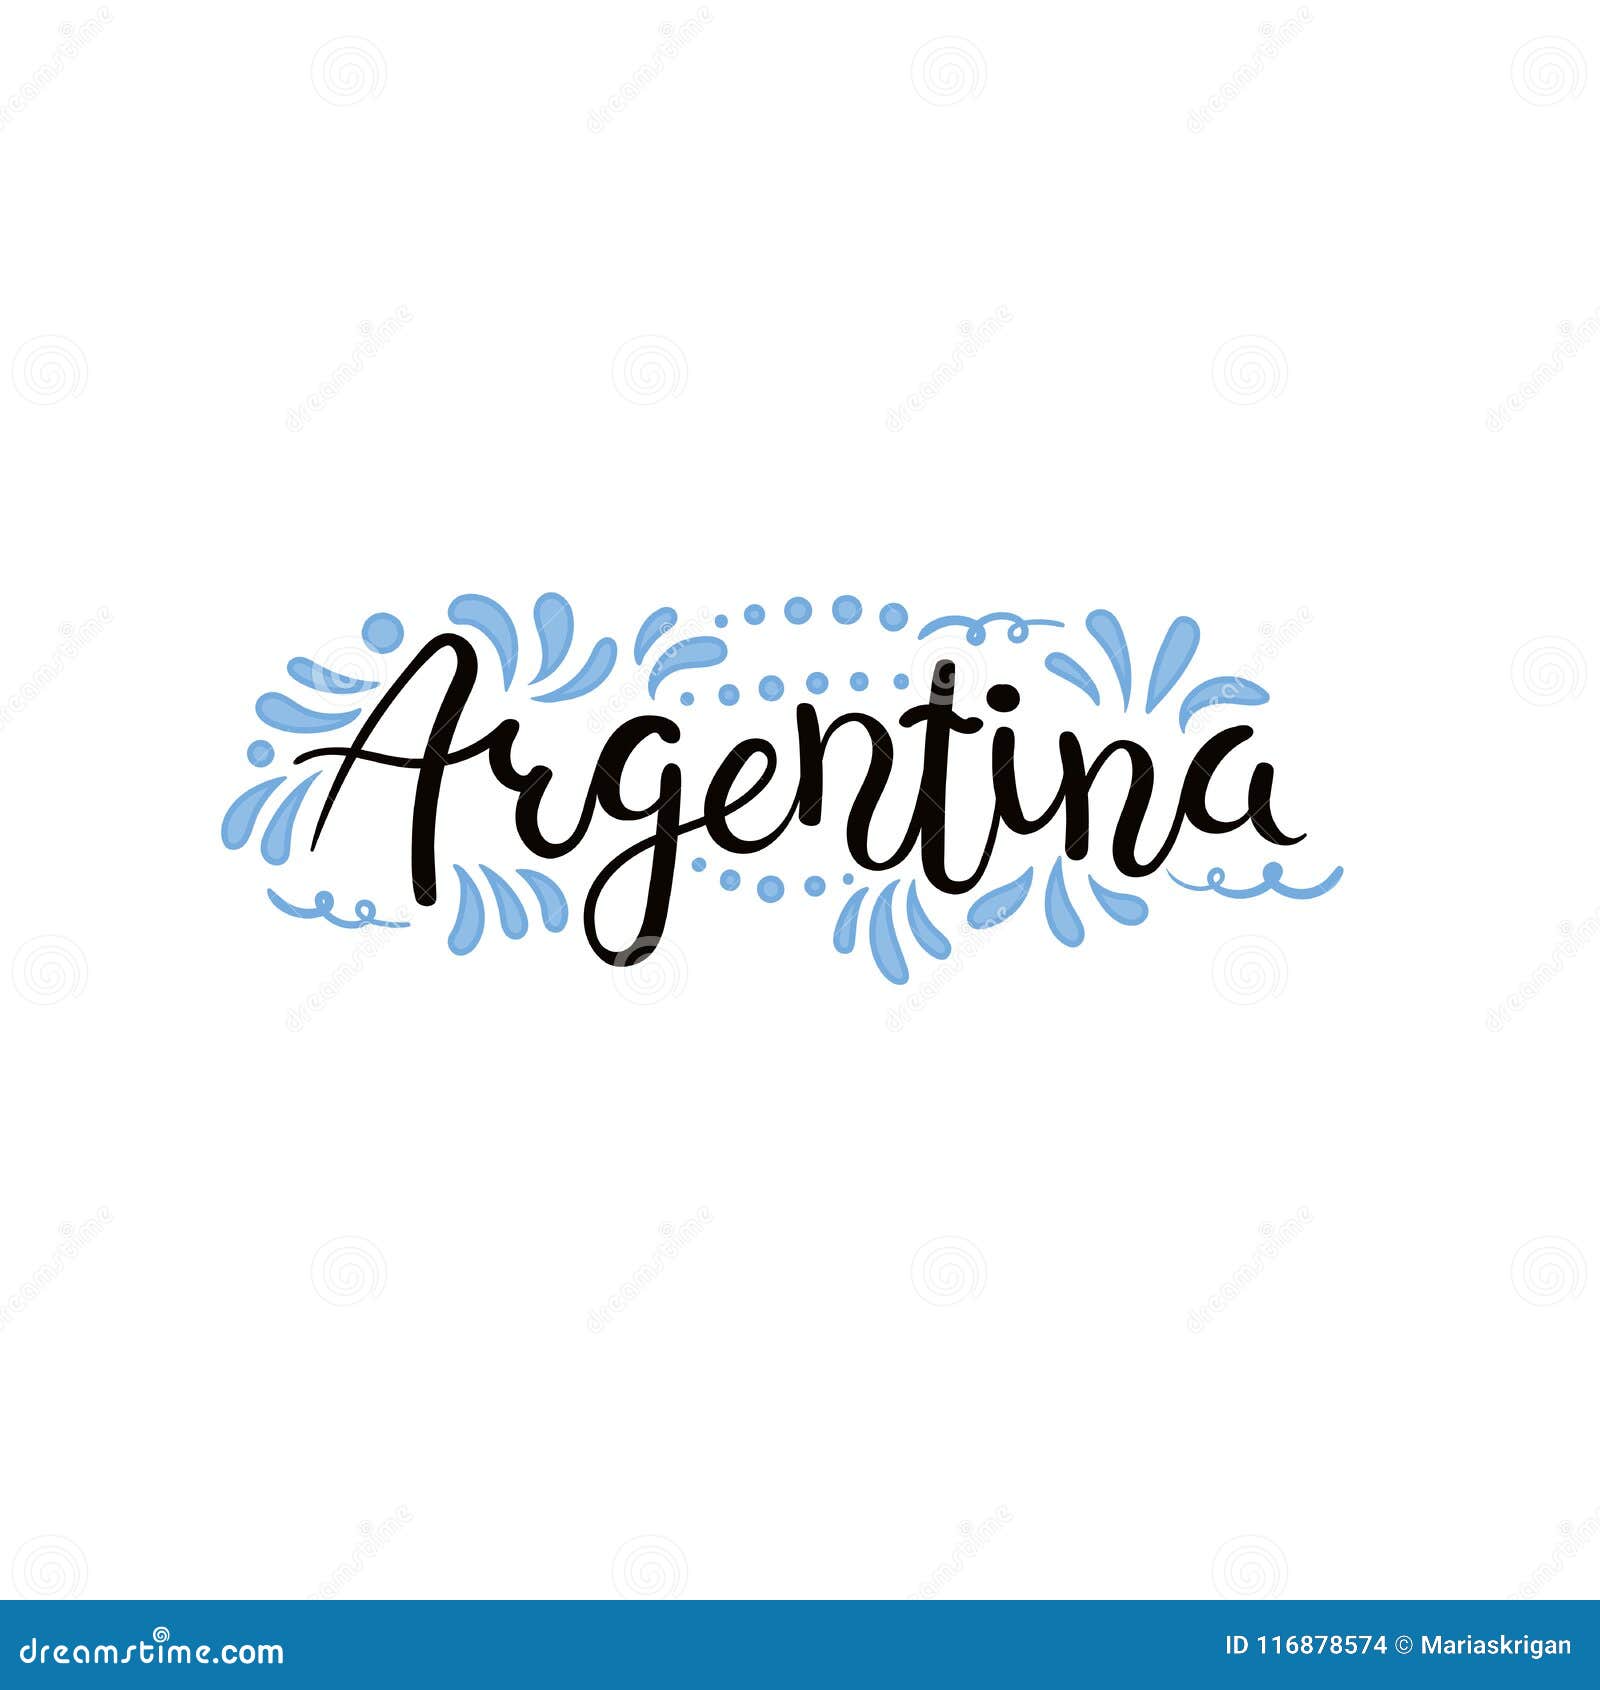 Argentina Calligraphic Lettering Quote Stock Vector - Illustration of